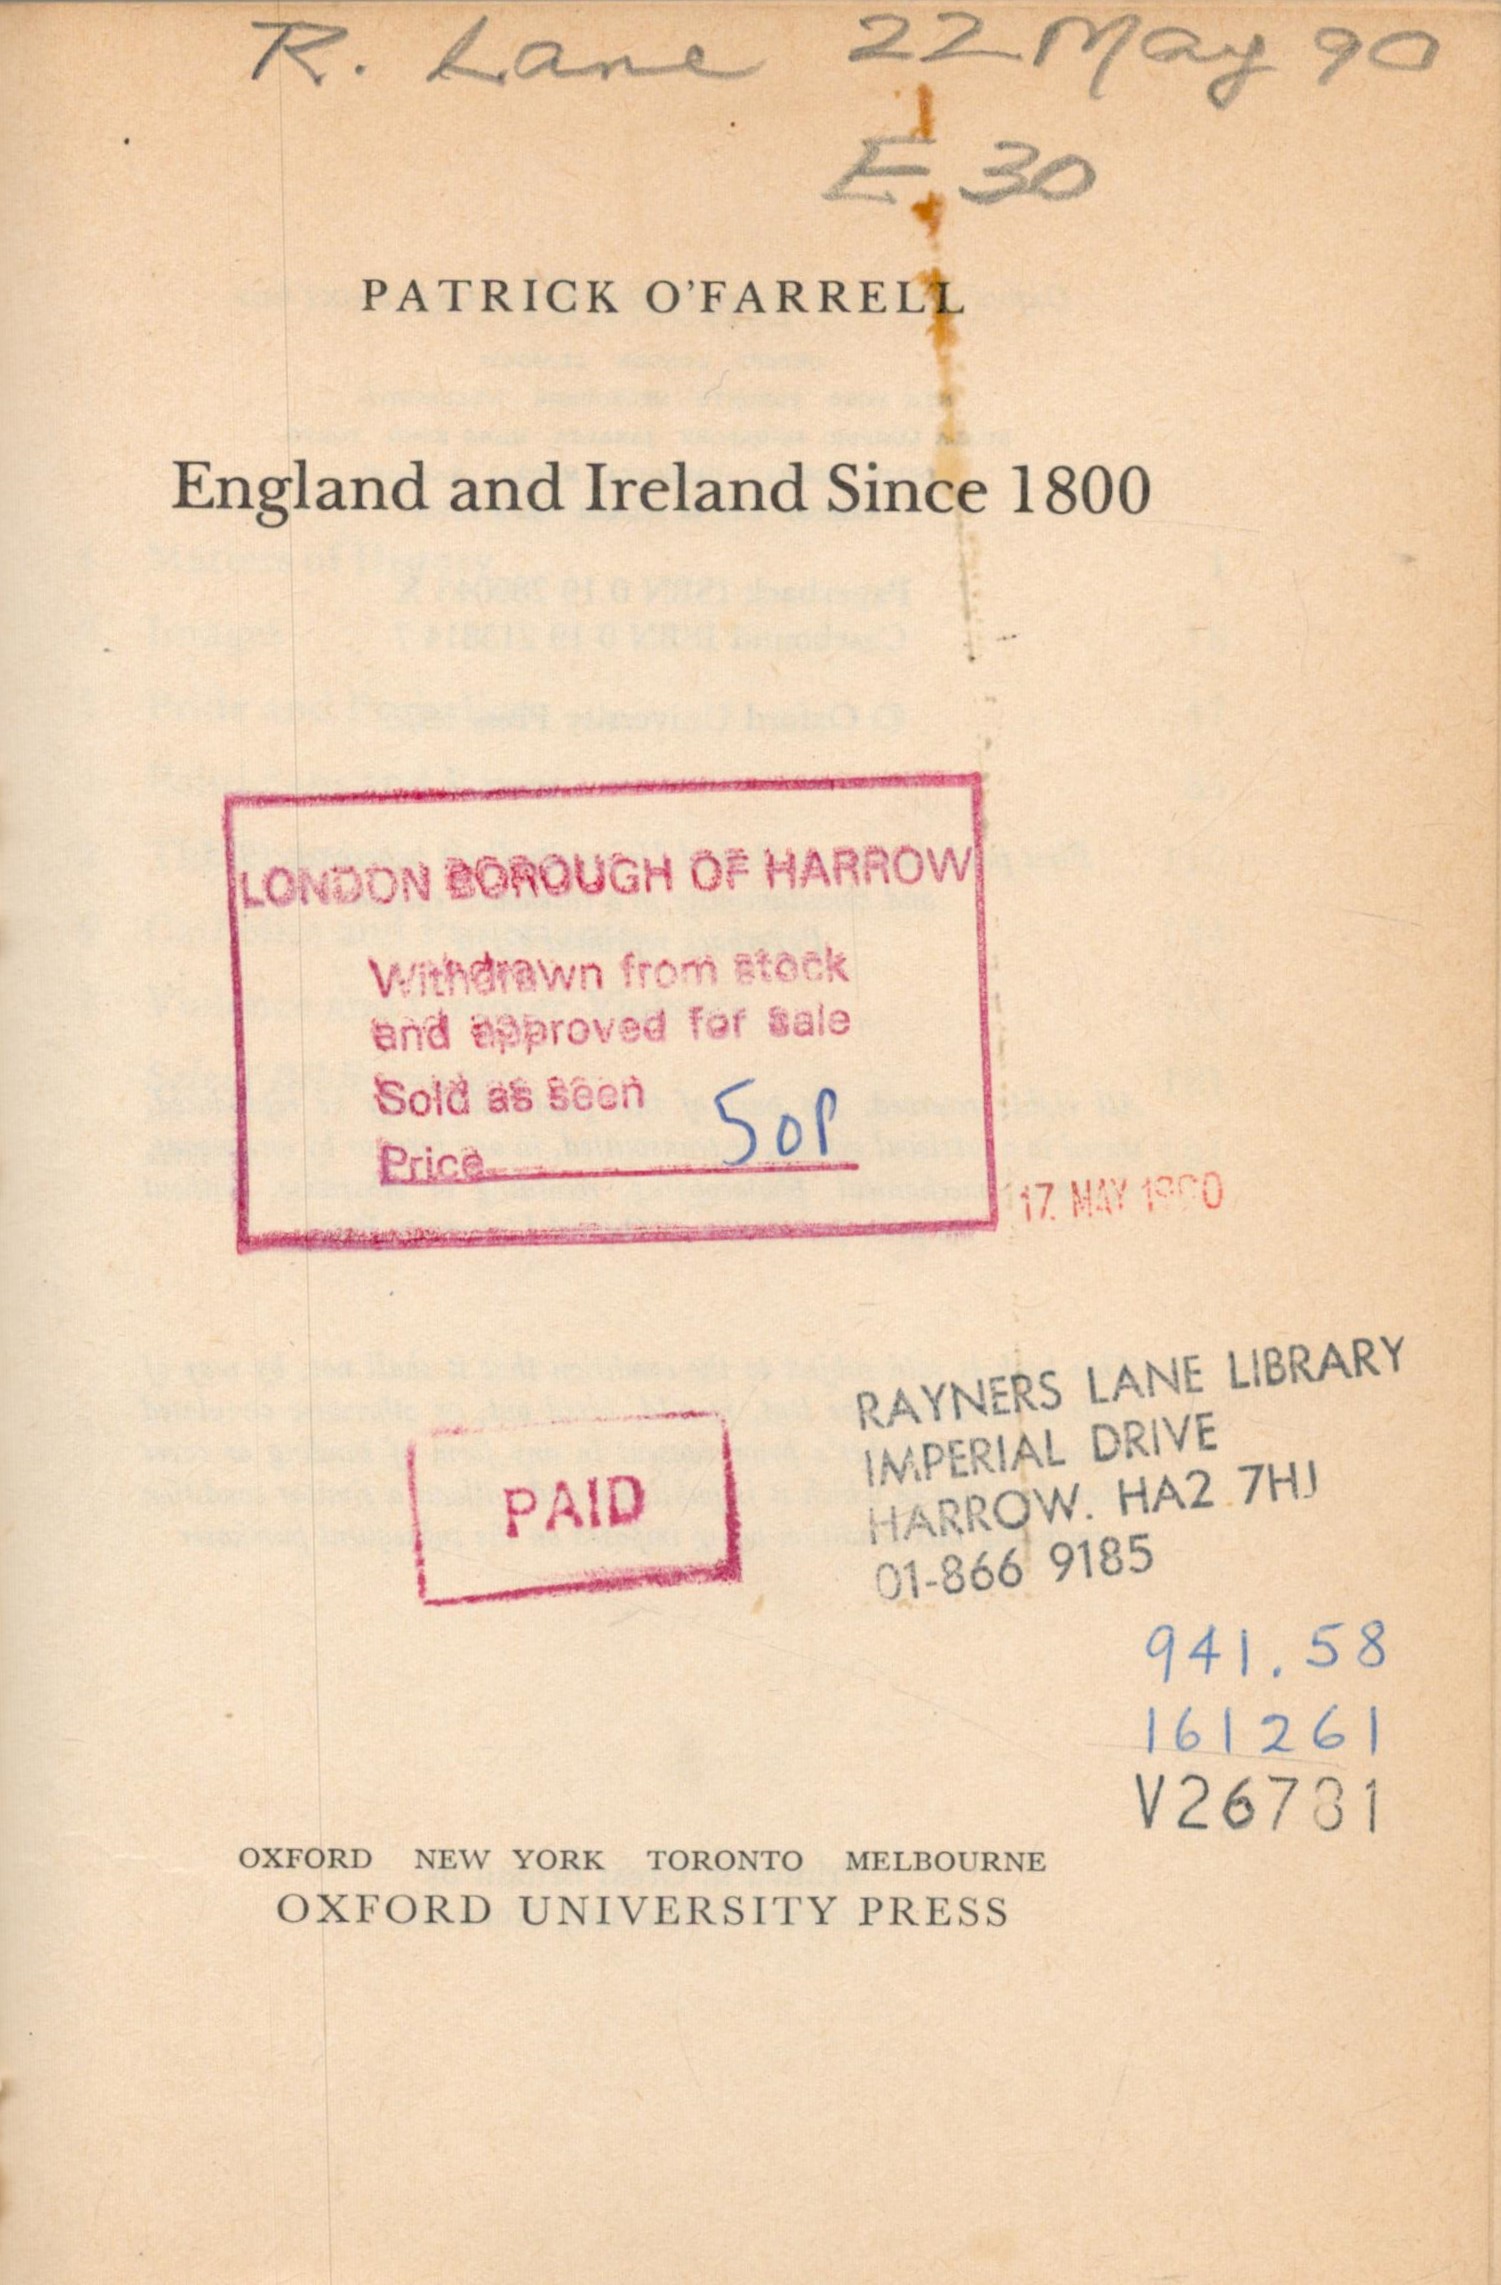 England and Ireland since 1800 by Patrick O'Farrell 1979 Second Paperback Edition Softback Book with - Image 2 of 3